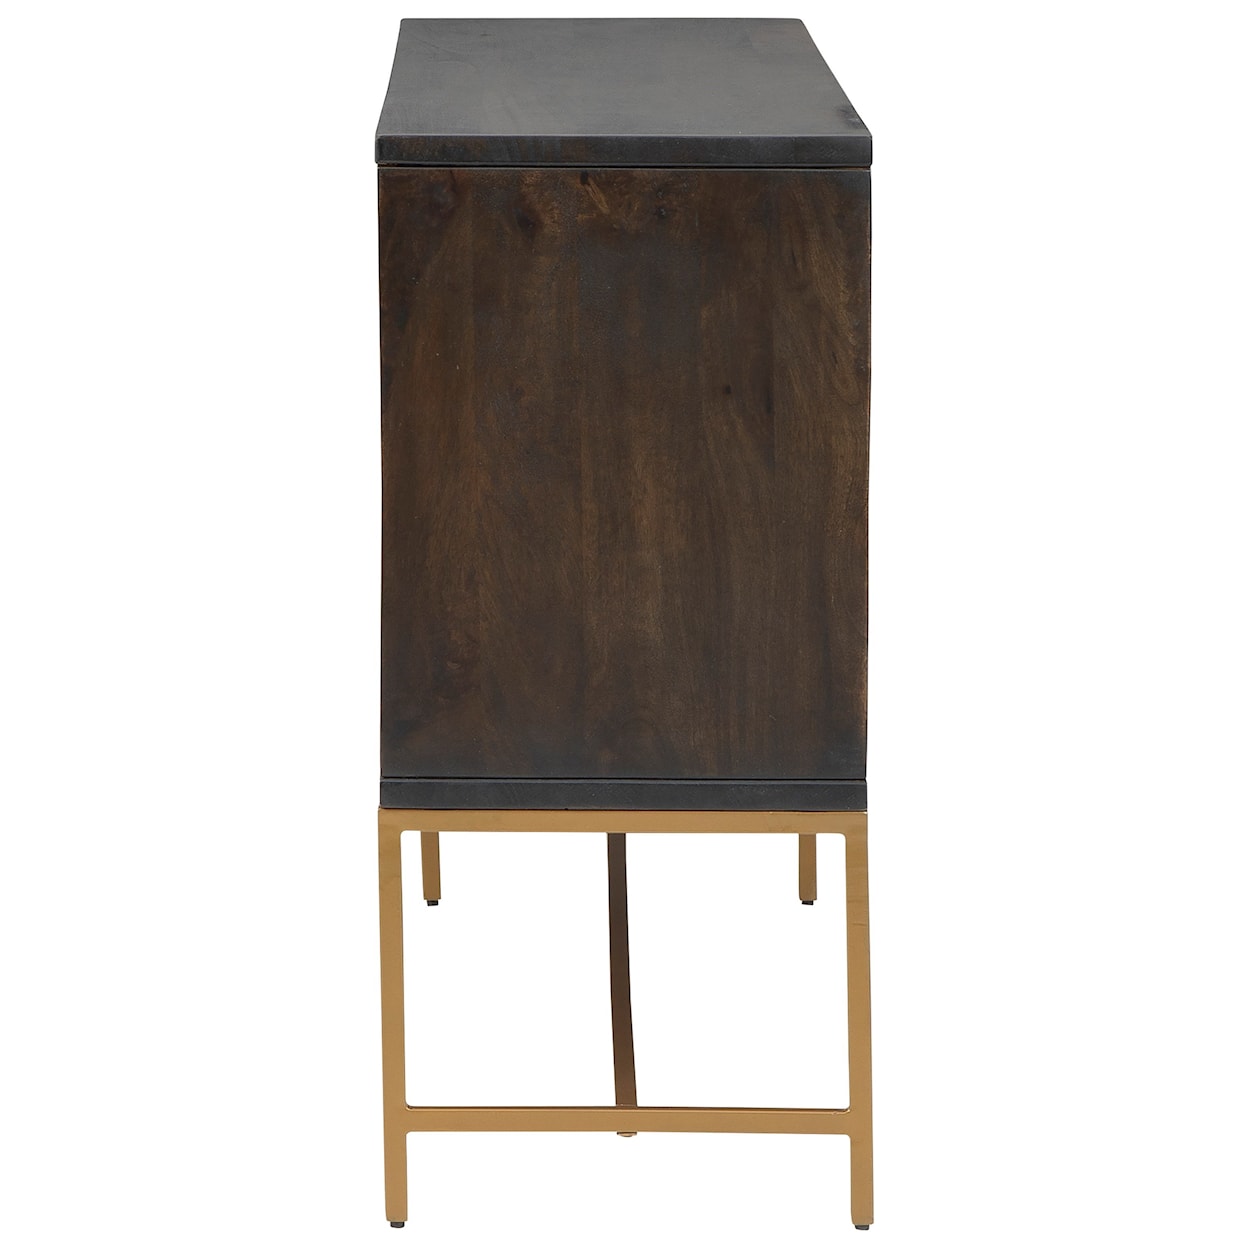 Benchcraft Elinmore Accent Cabinet